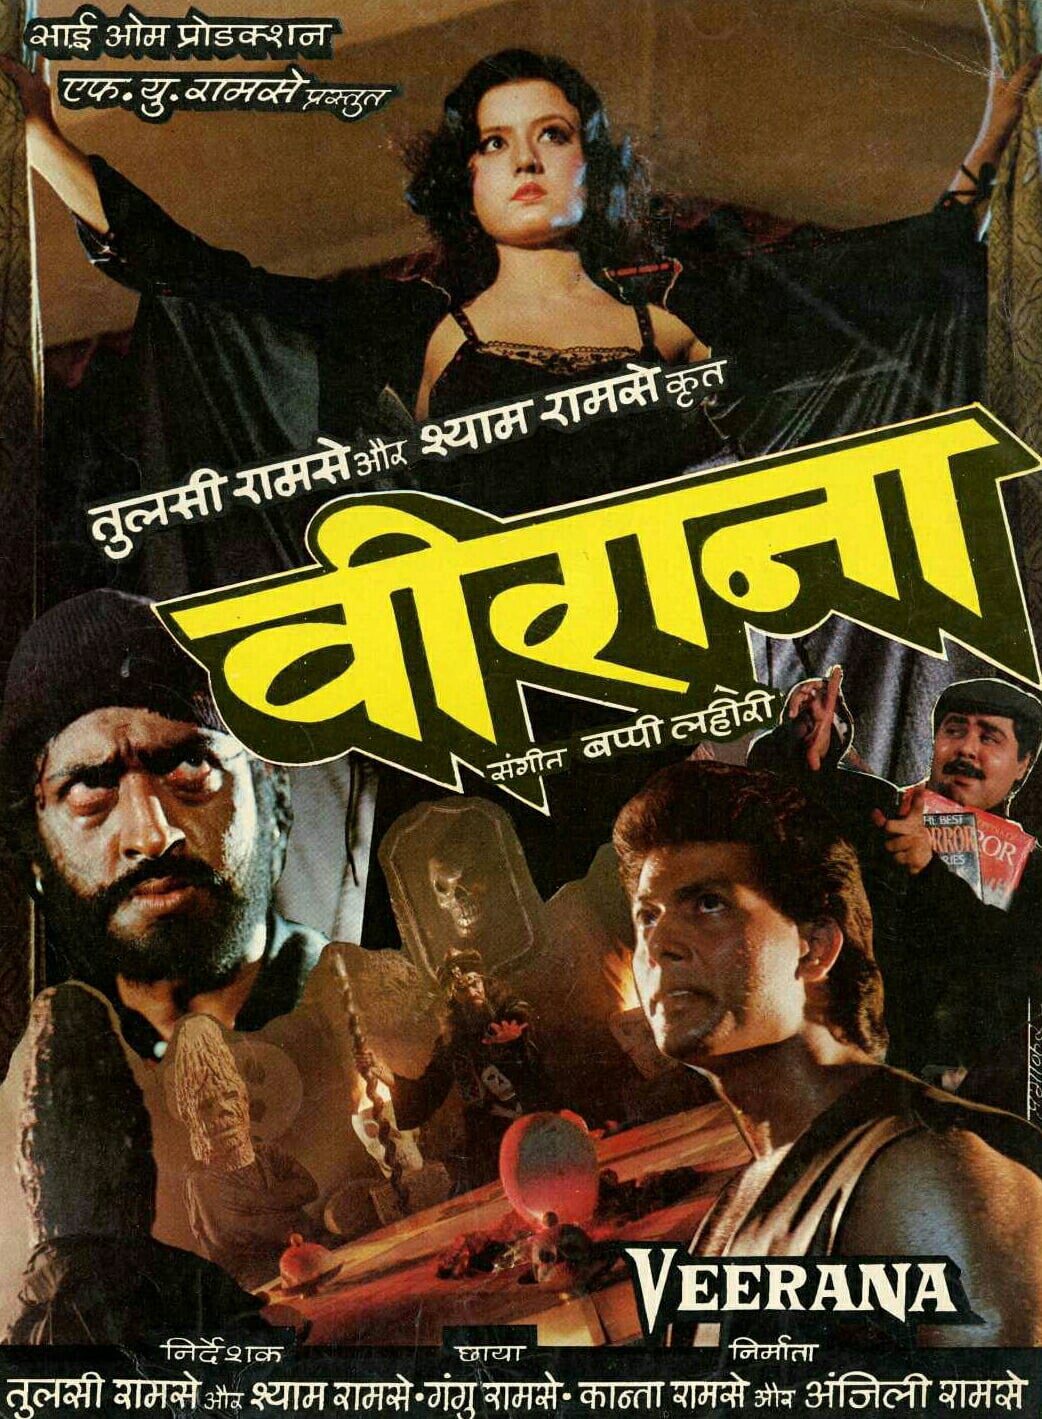 Poster for the movie "Veerana"